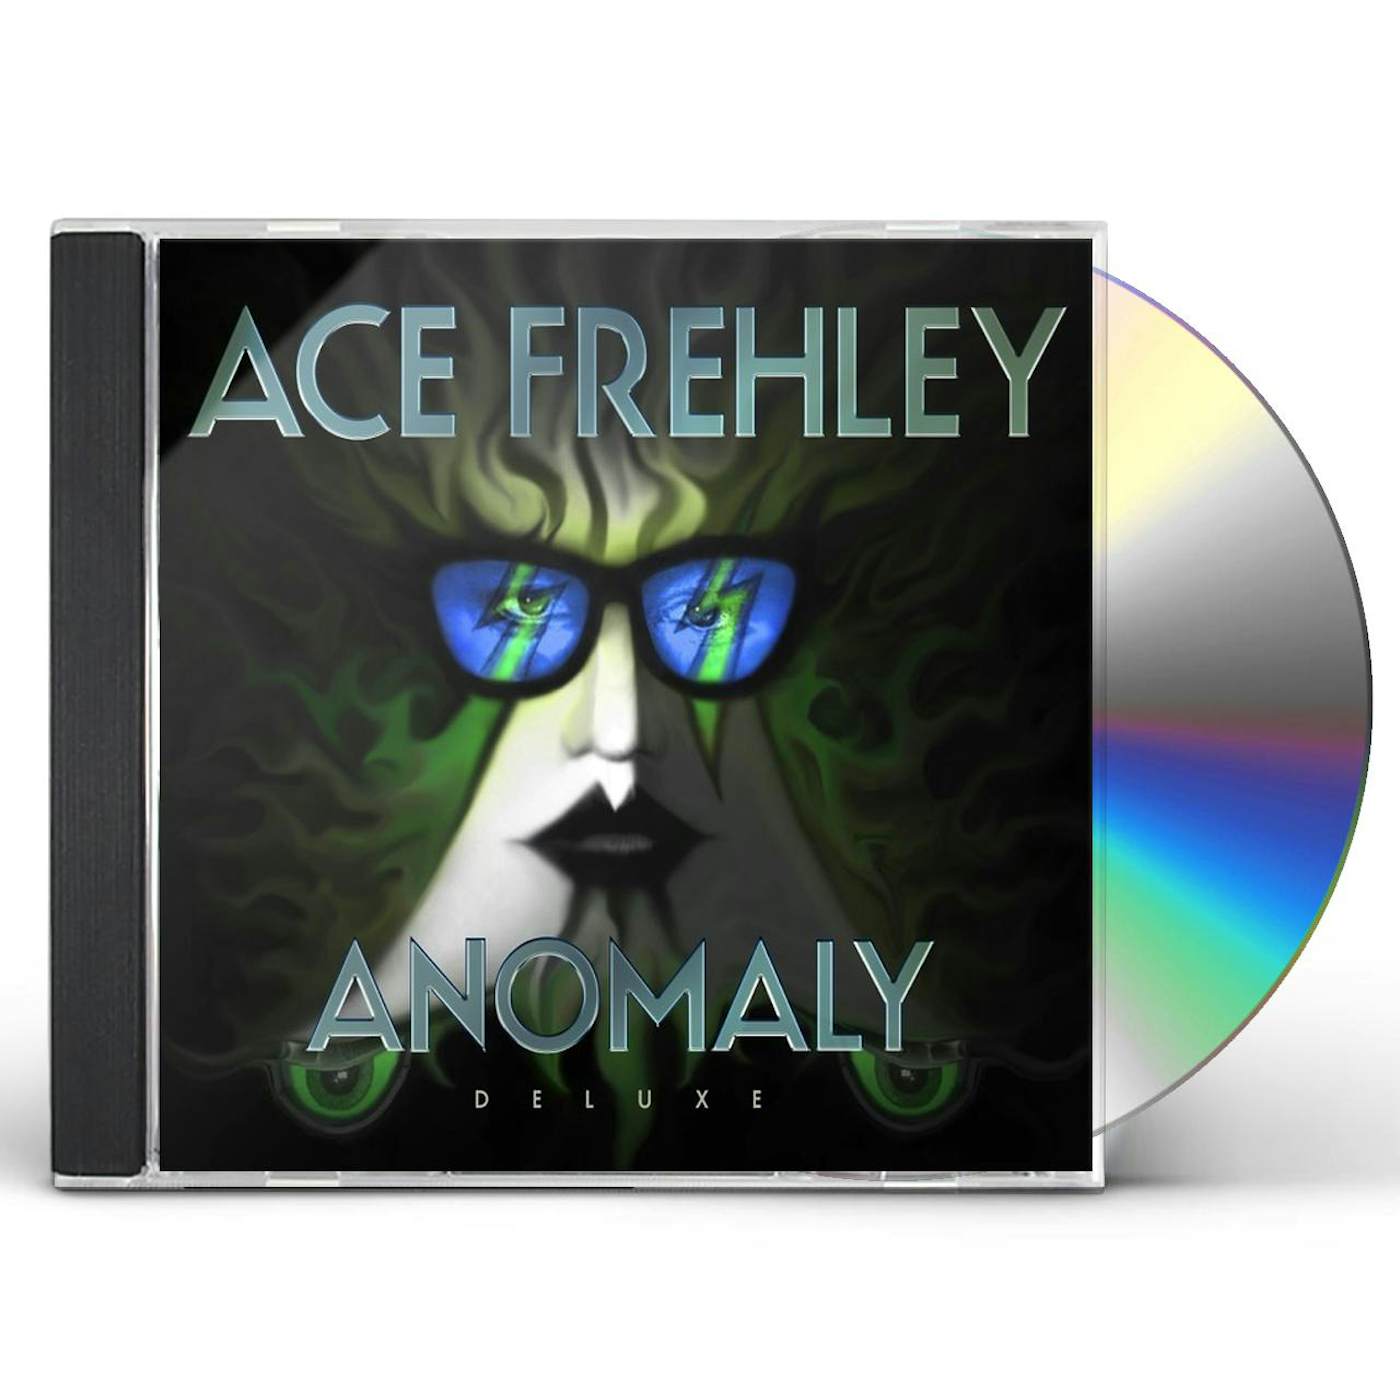 Ace Frehley ANOMALY DELUXE CD